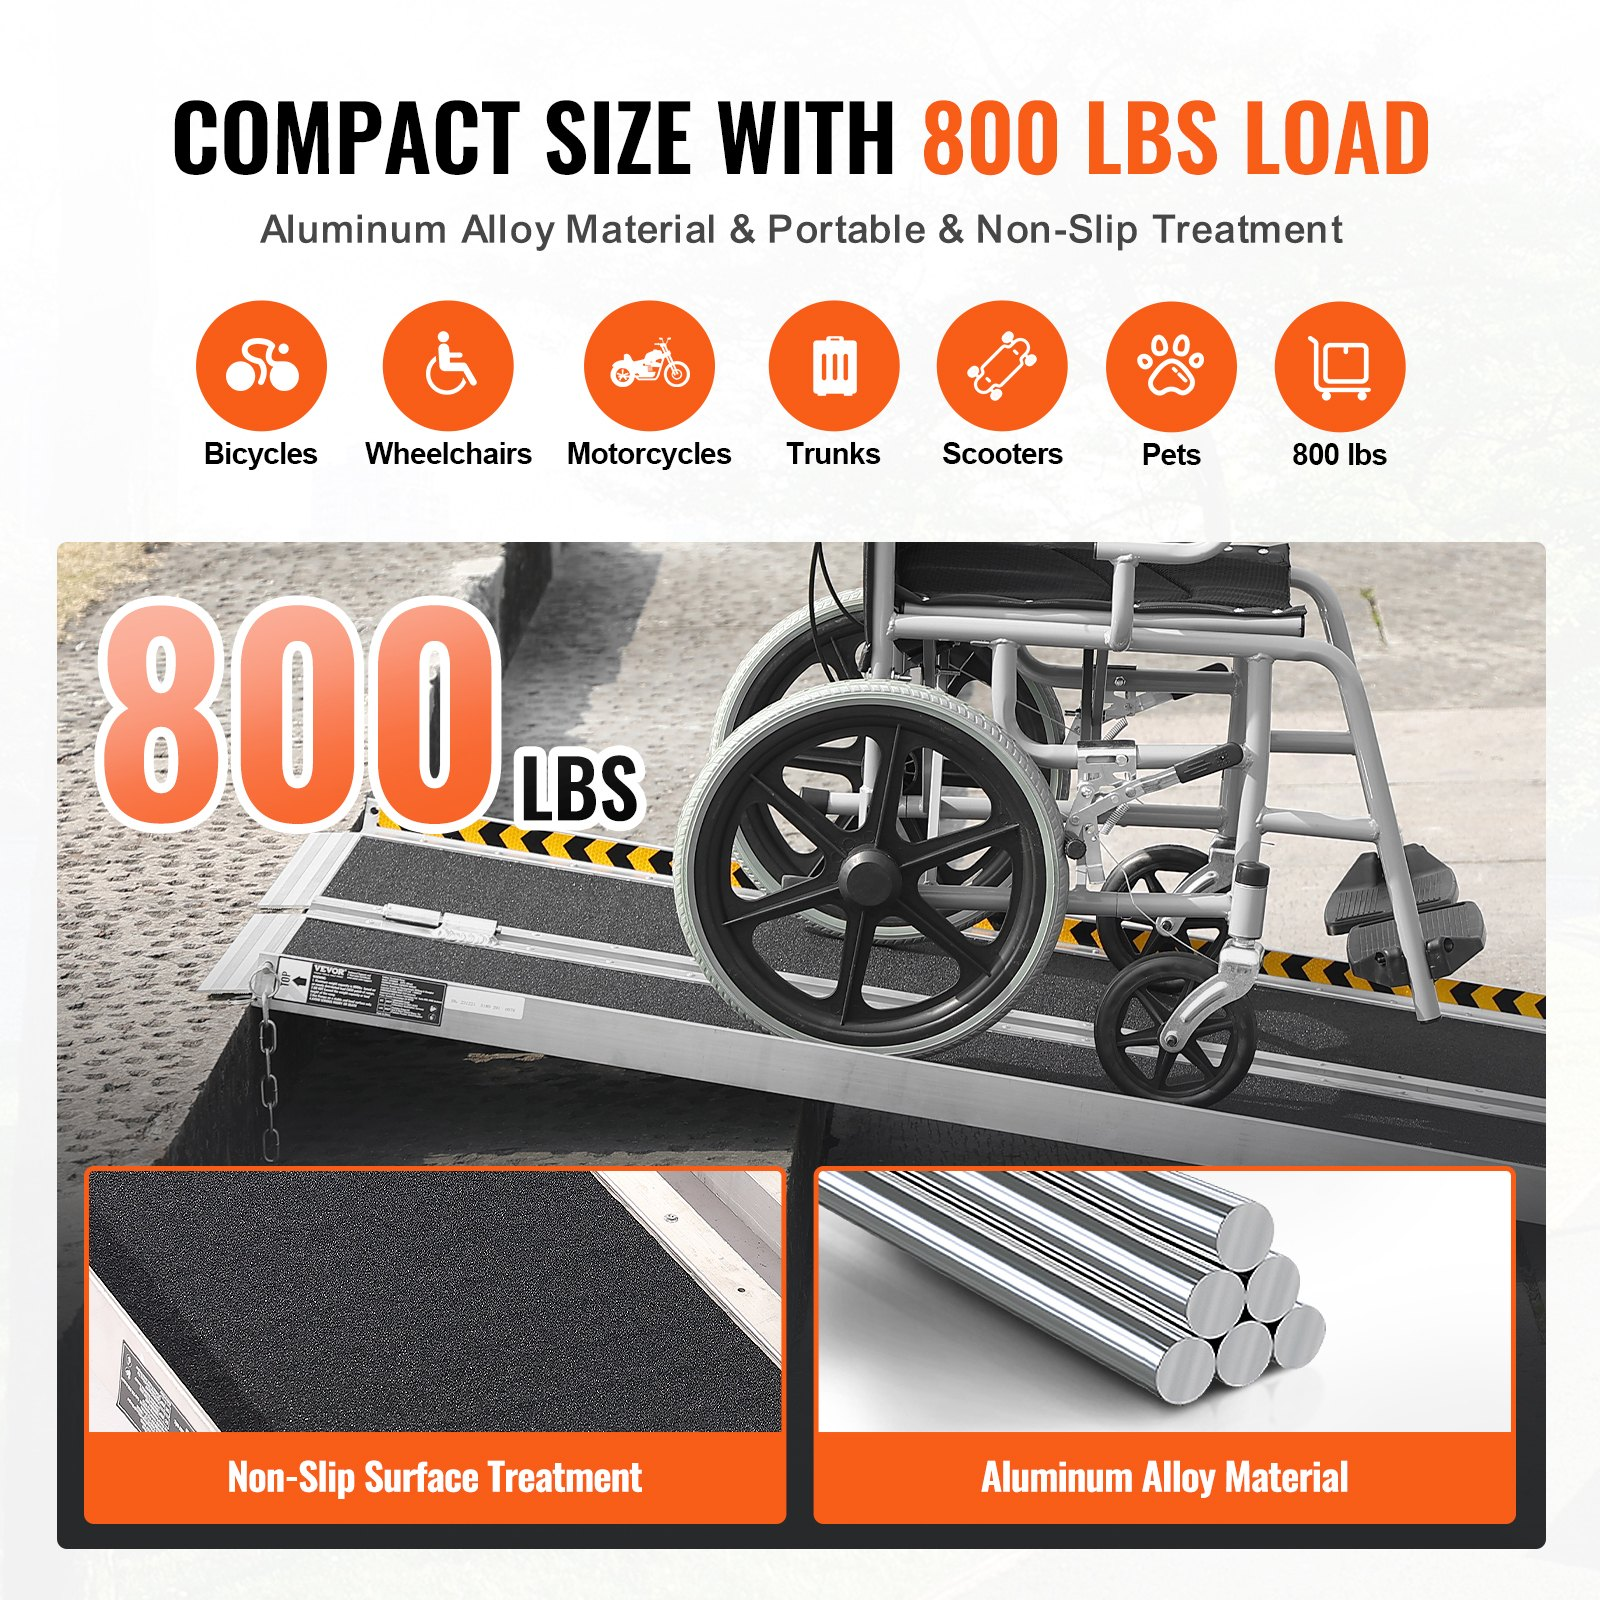 VEVOR Portable Wheelchair Ramp, 6 ft 800 lbs Capacity, Non-Slip Aluminum Folding Threshold Ramp, Foldable Mobility Scooter Ramp Wheel Chair Ramp, Handicap Ramp for Home Steps, Stairs, Doorways, Curbs, Goodies N Stuff